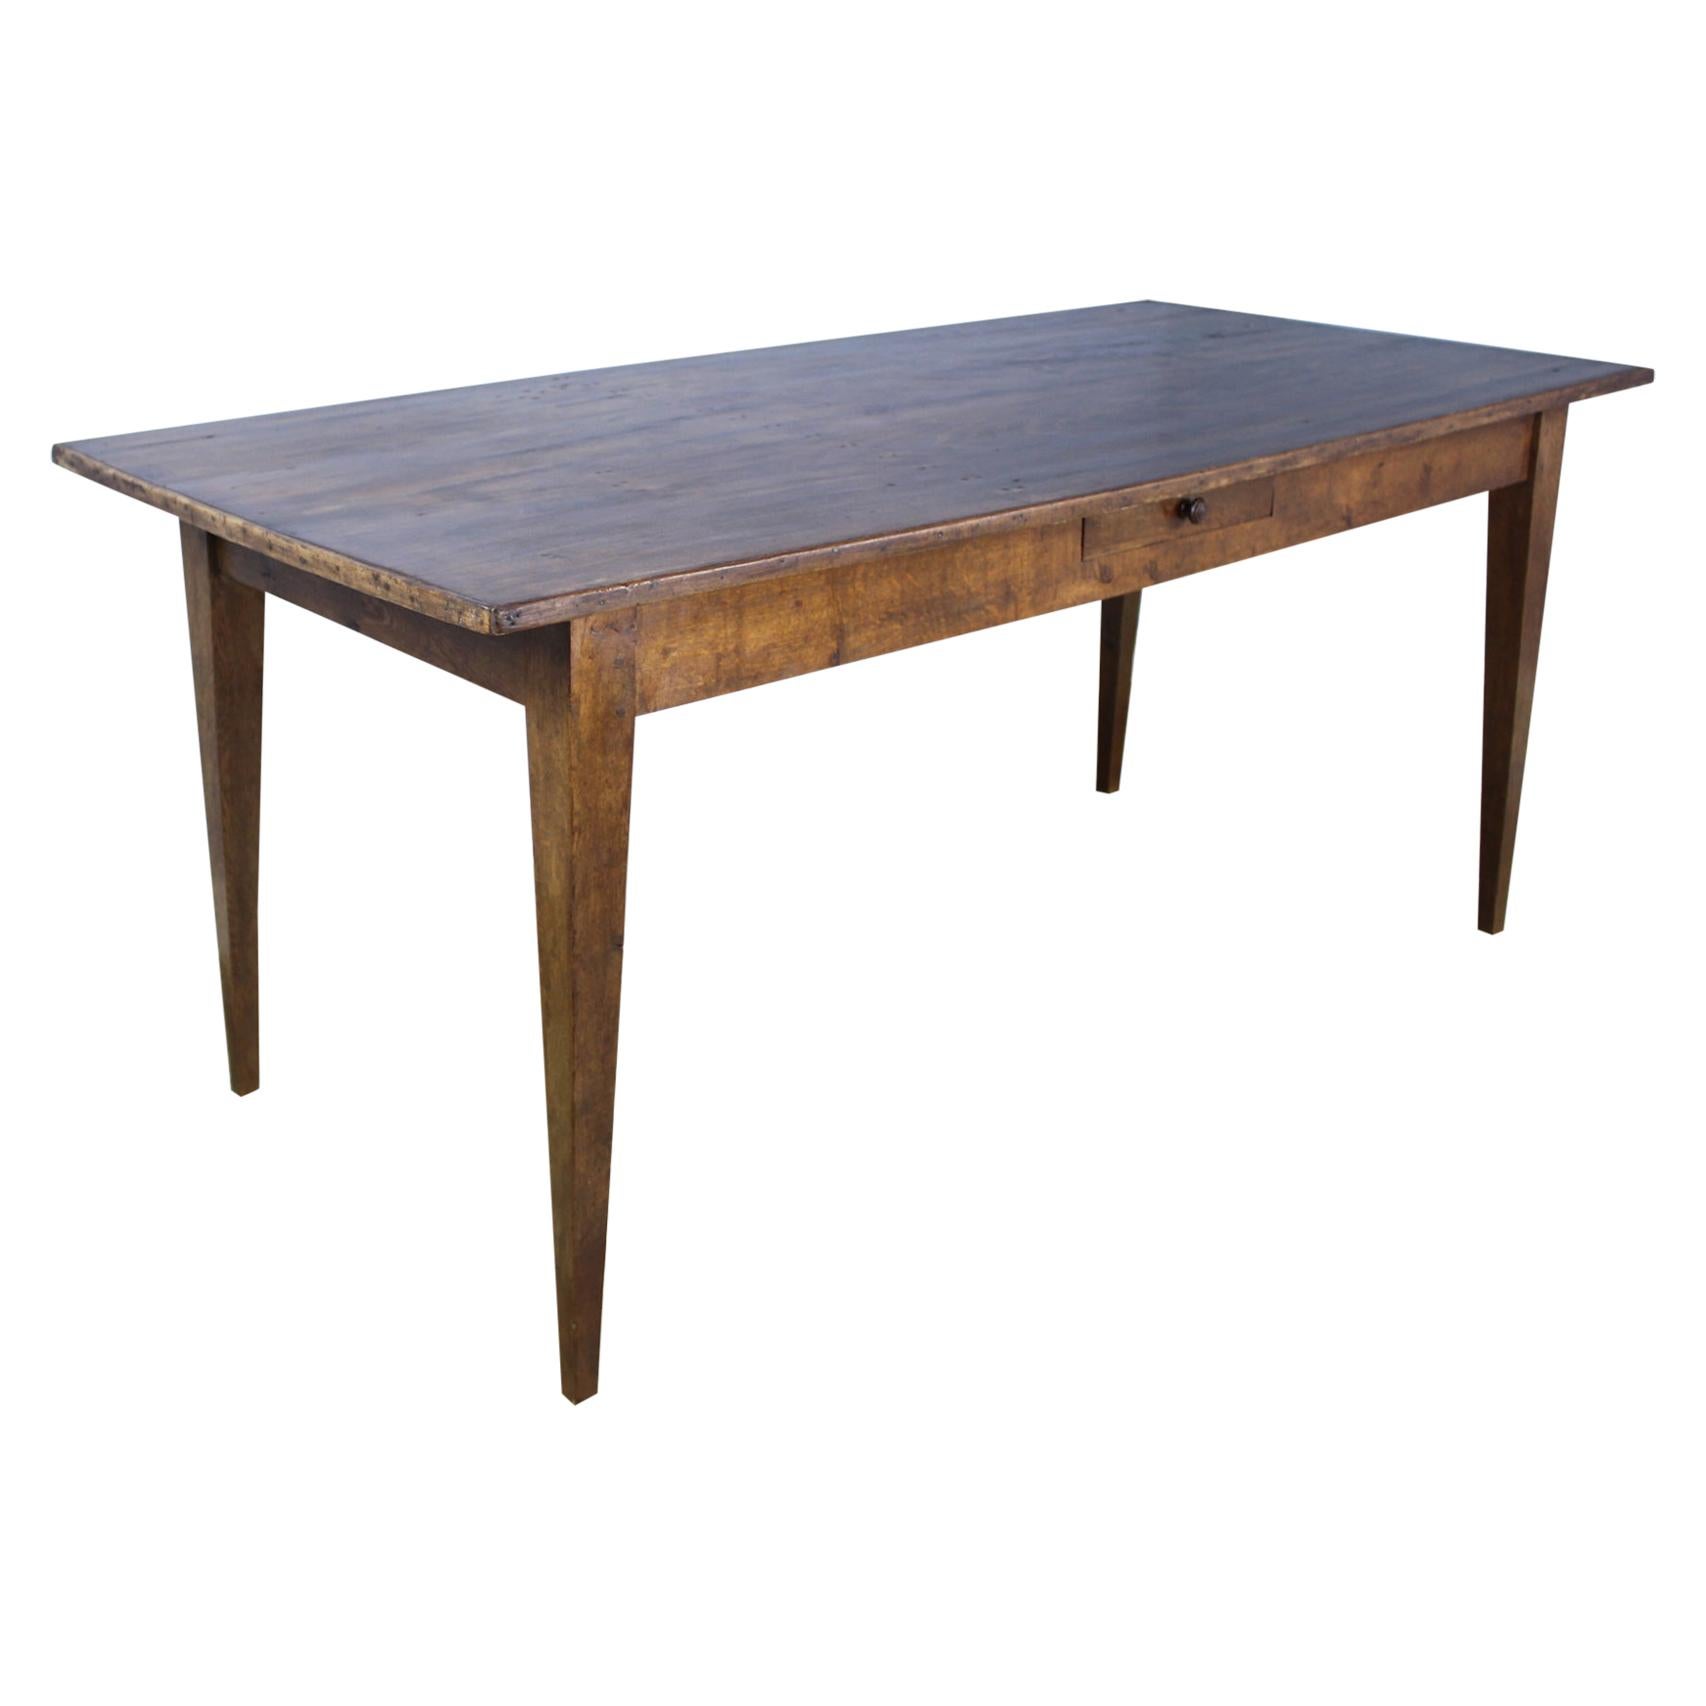 Antique Oak Farm Table with Decorative Edge and Single Drawer